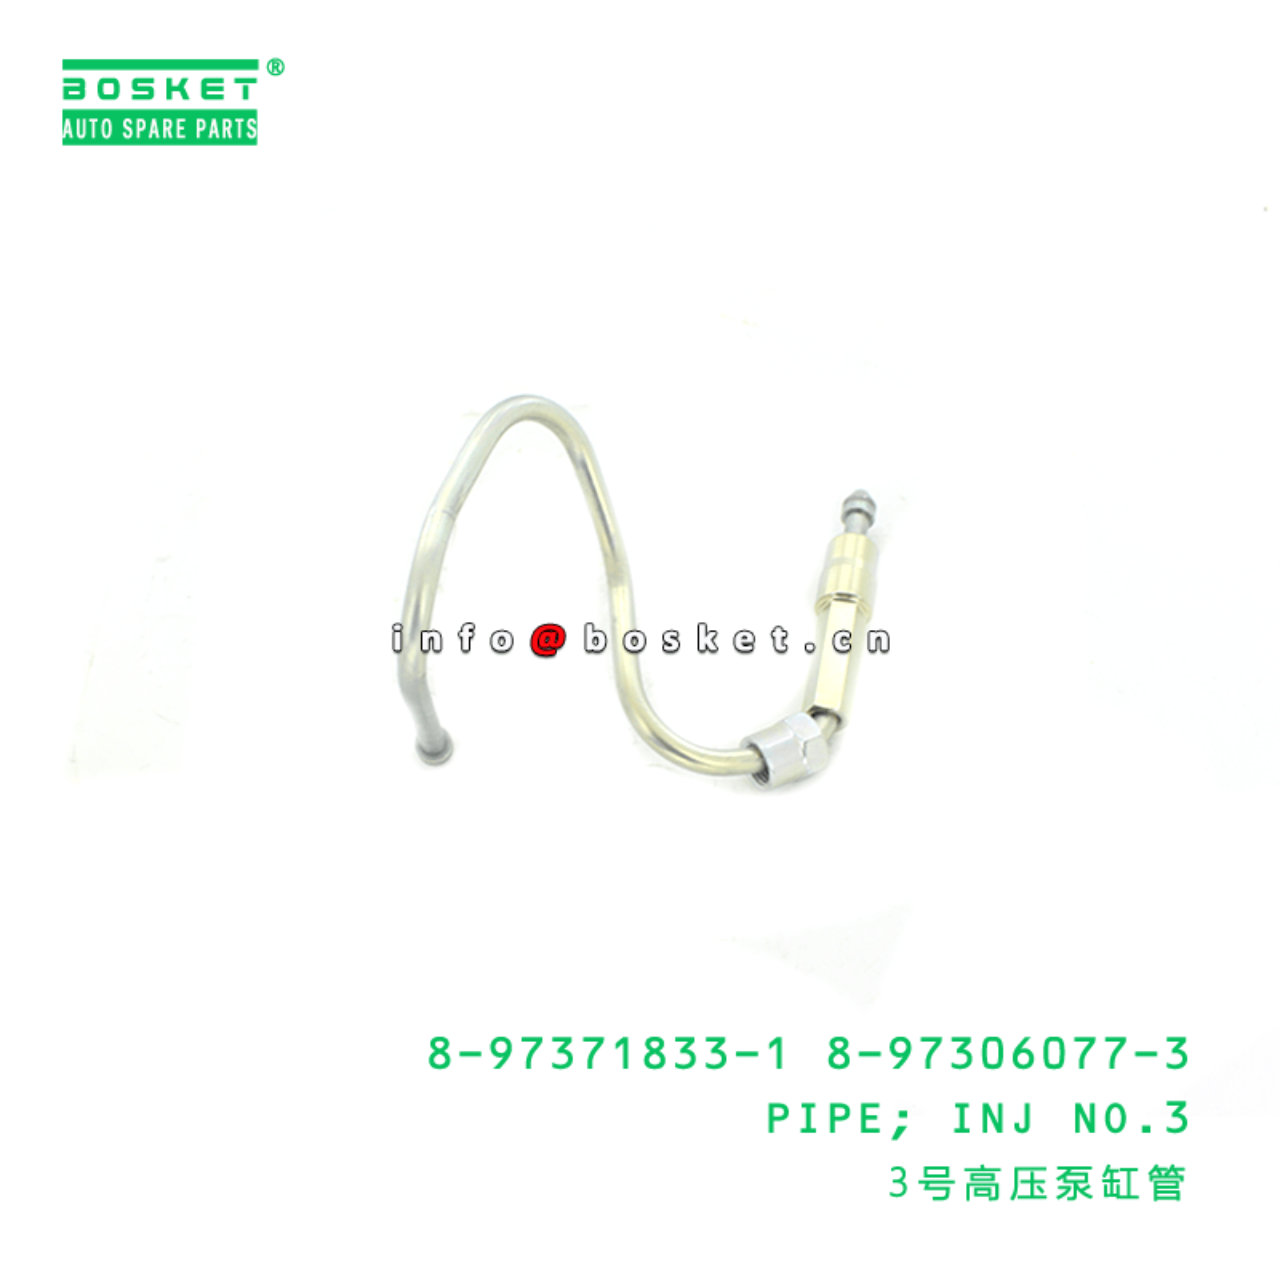 8-97371833-1 8-97306077-3 Injection No.3 Pipe 8973718331 8973060773 Suitable for ISUZU NPR 4HK1